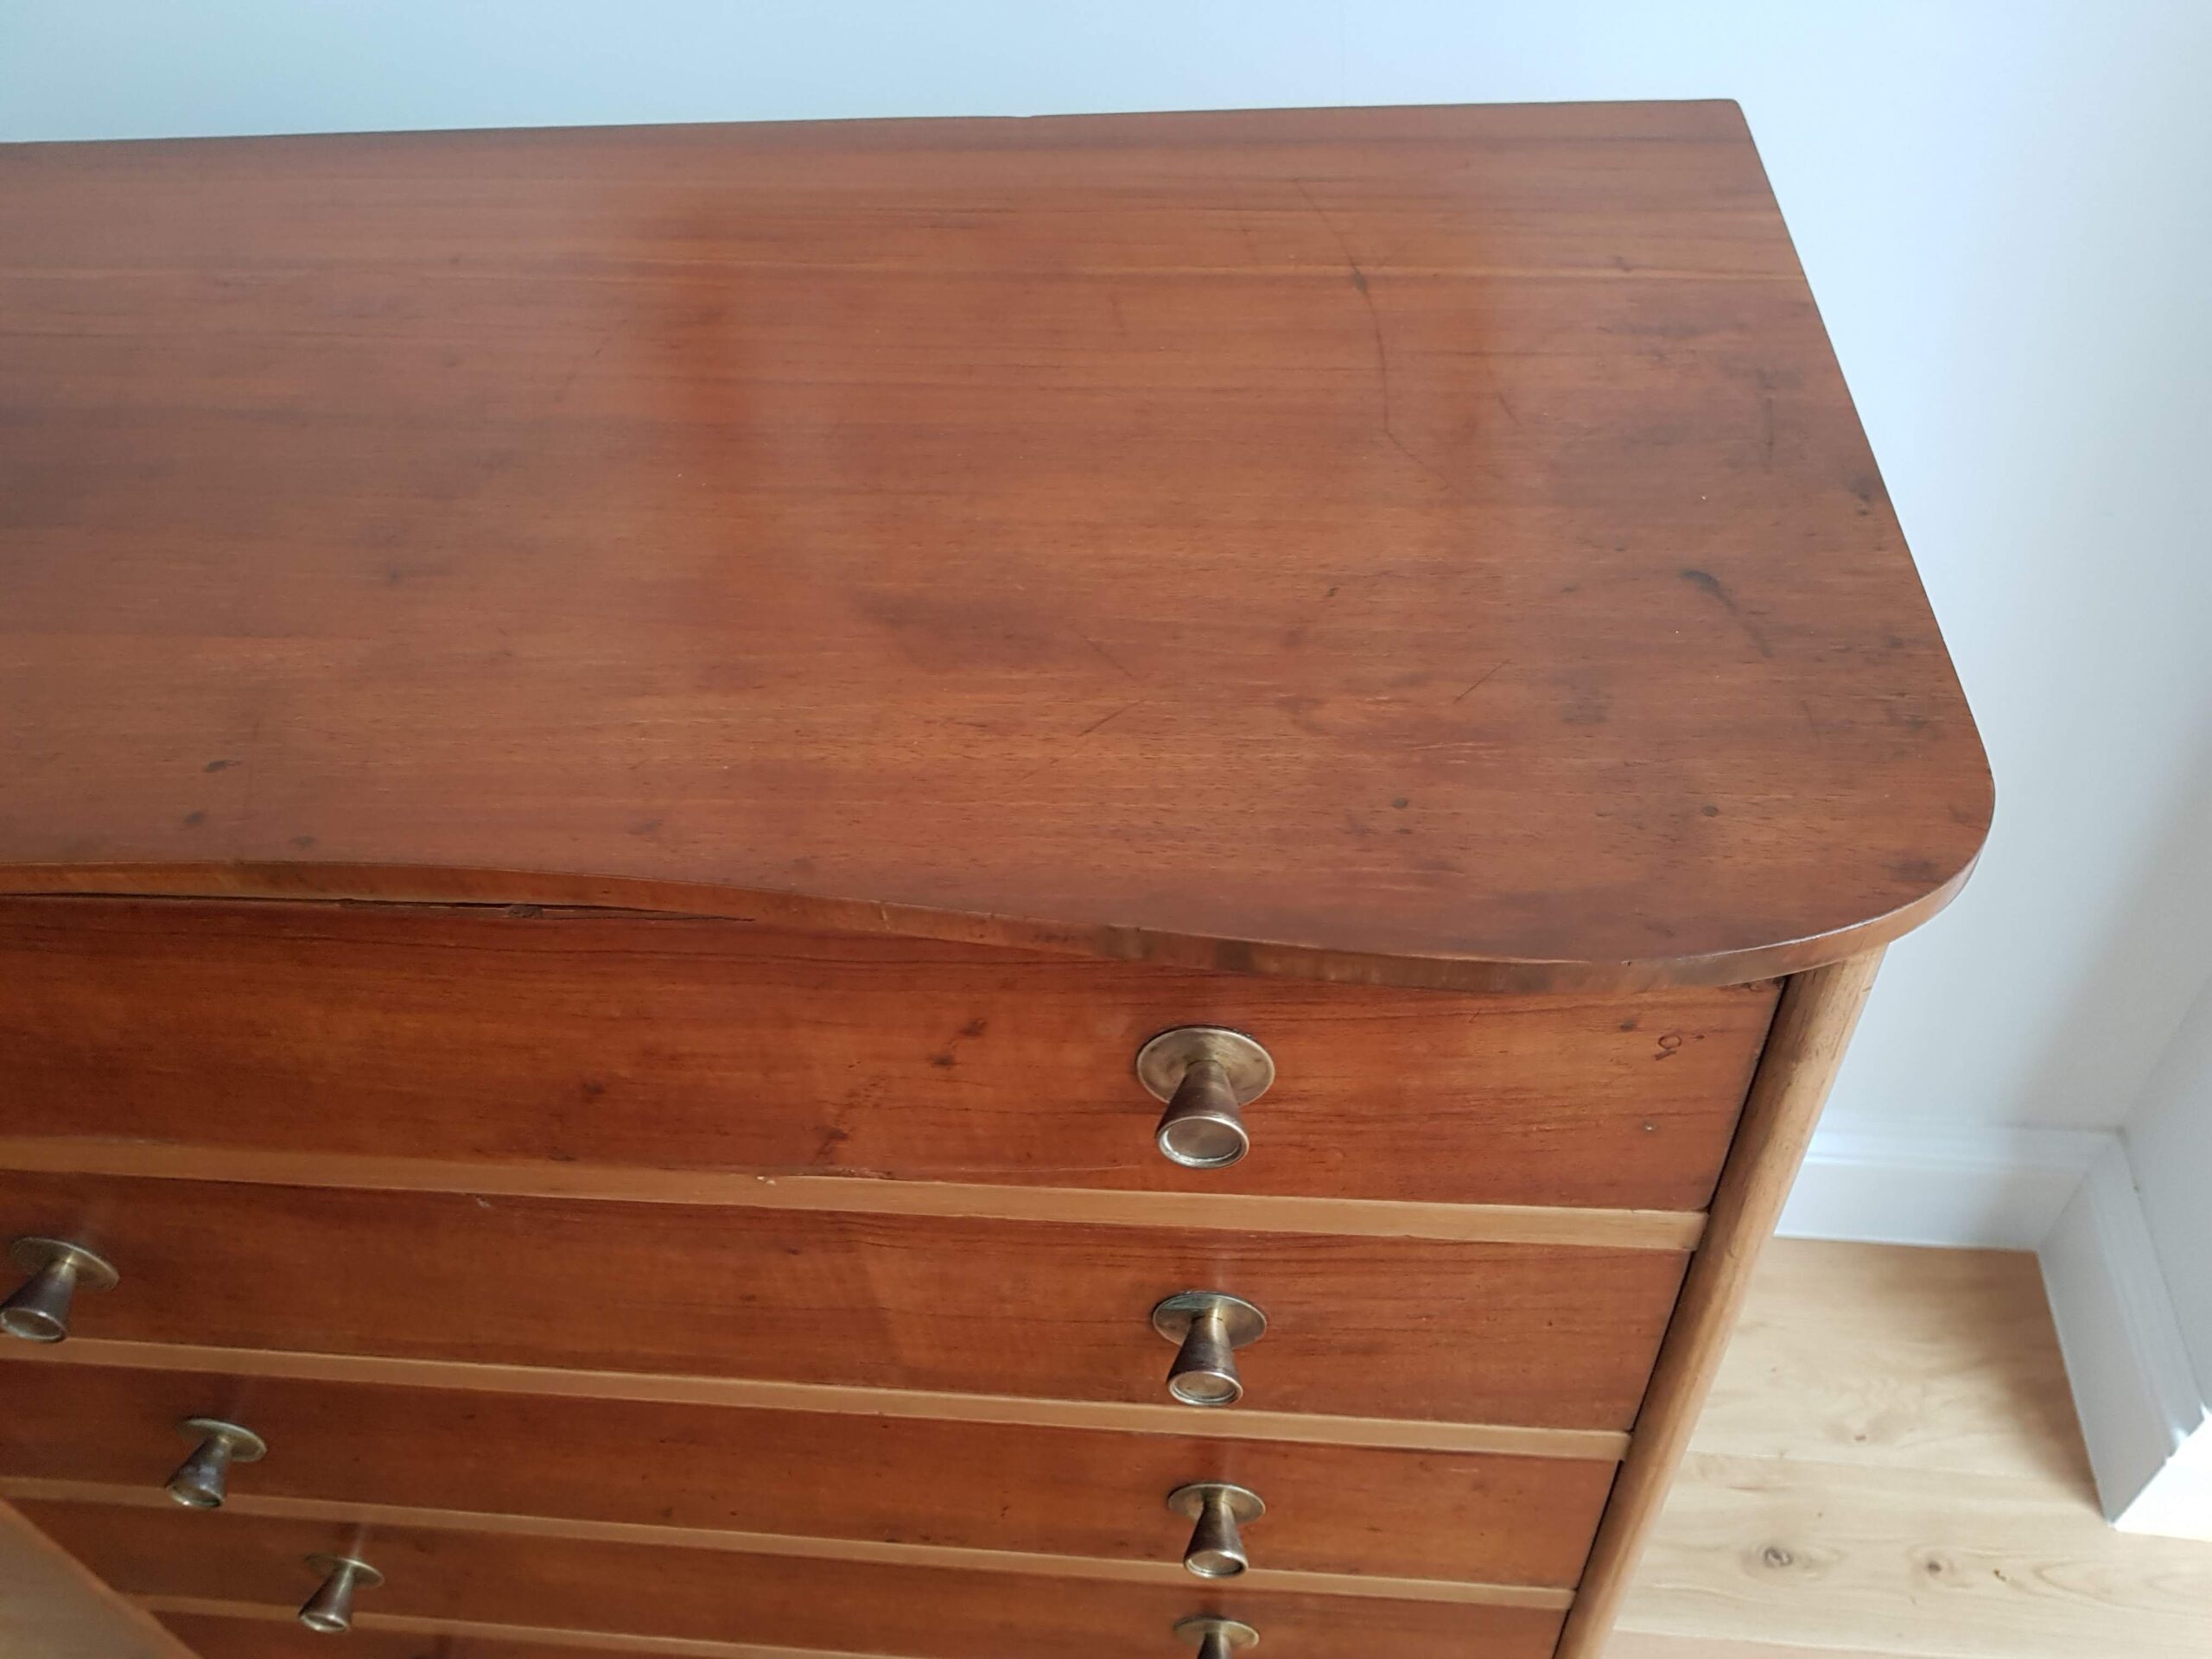 Desirable Mahogany Curved Chest of Draws Restoration – Quality Never Goes Out of Style